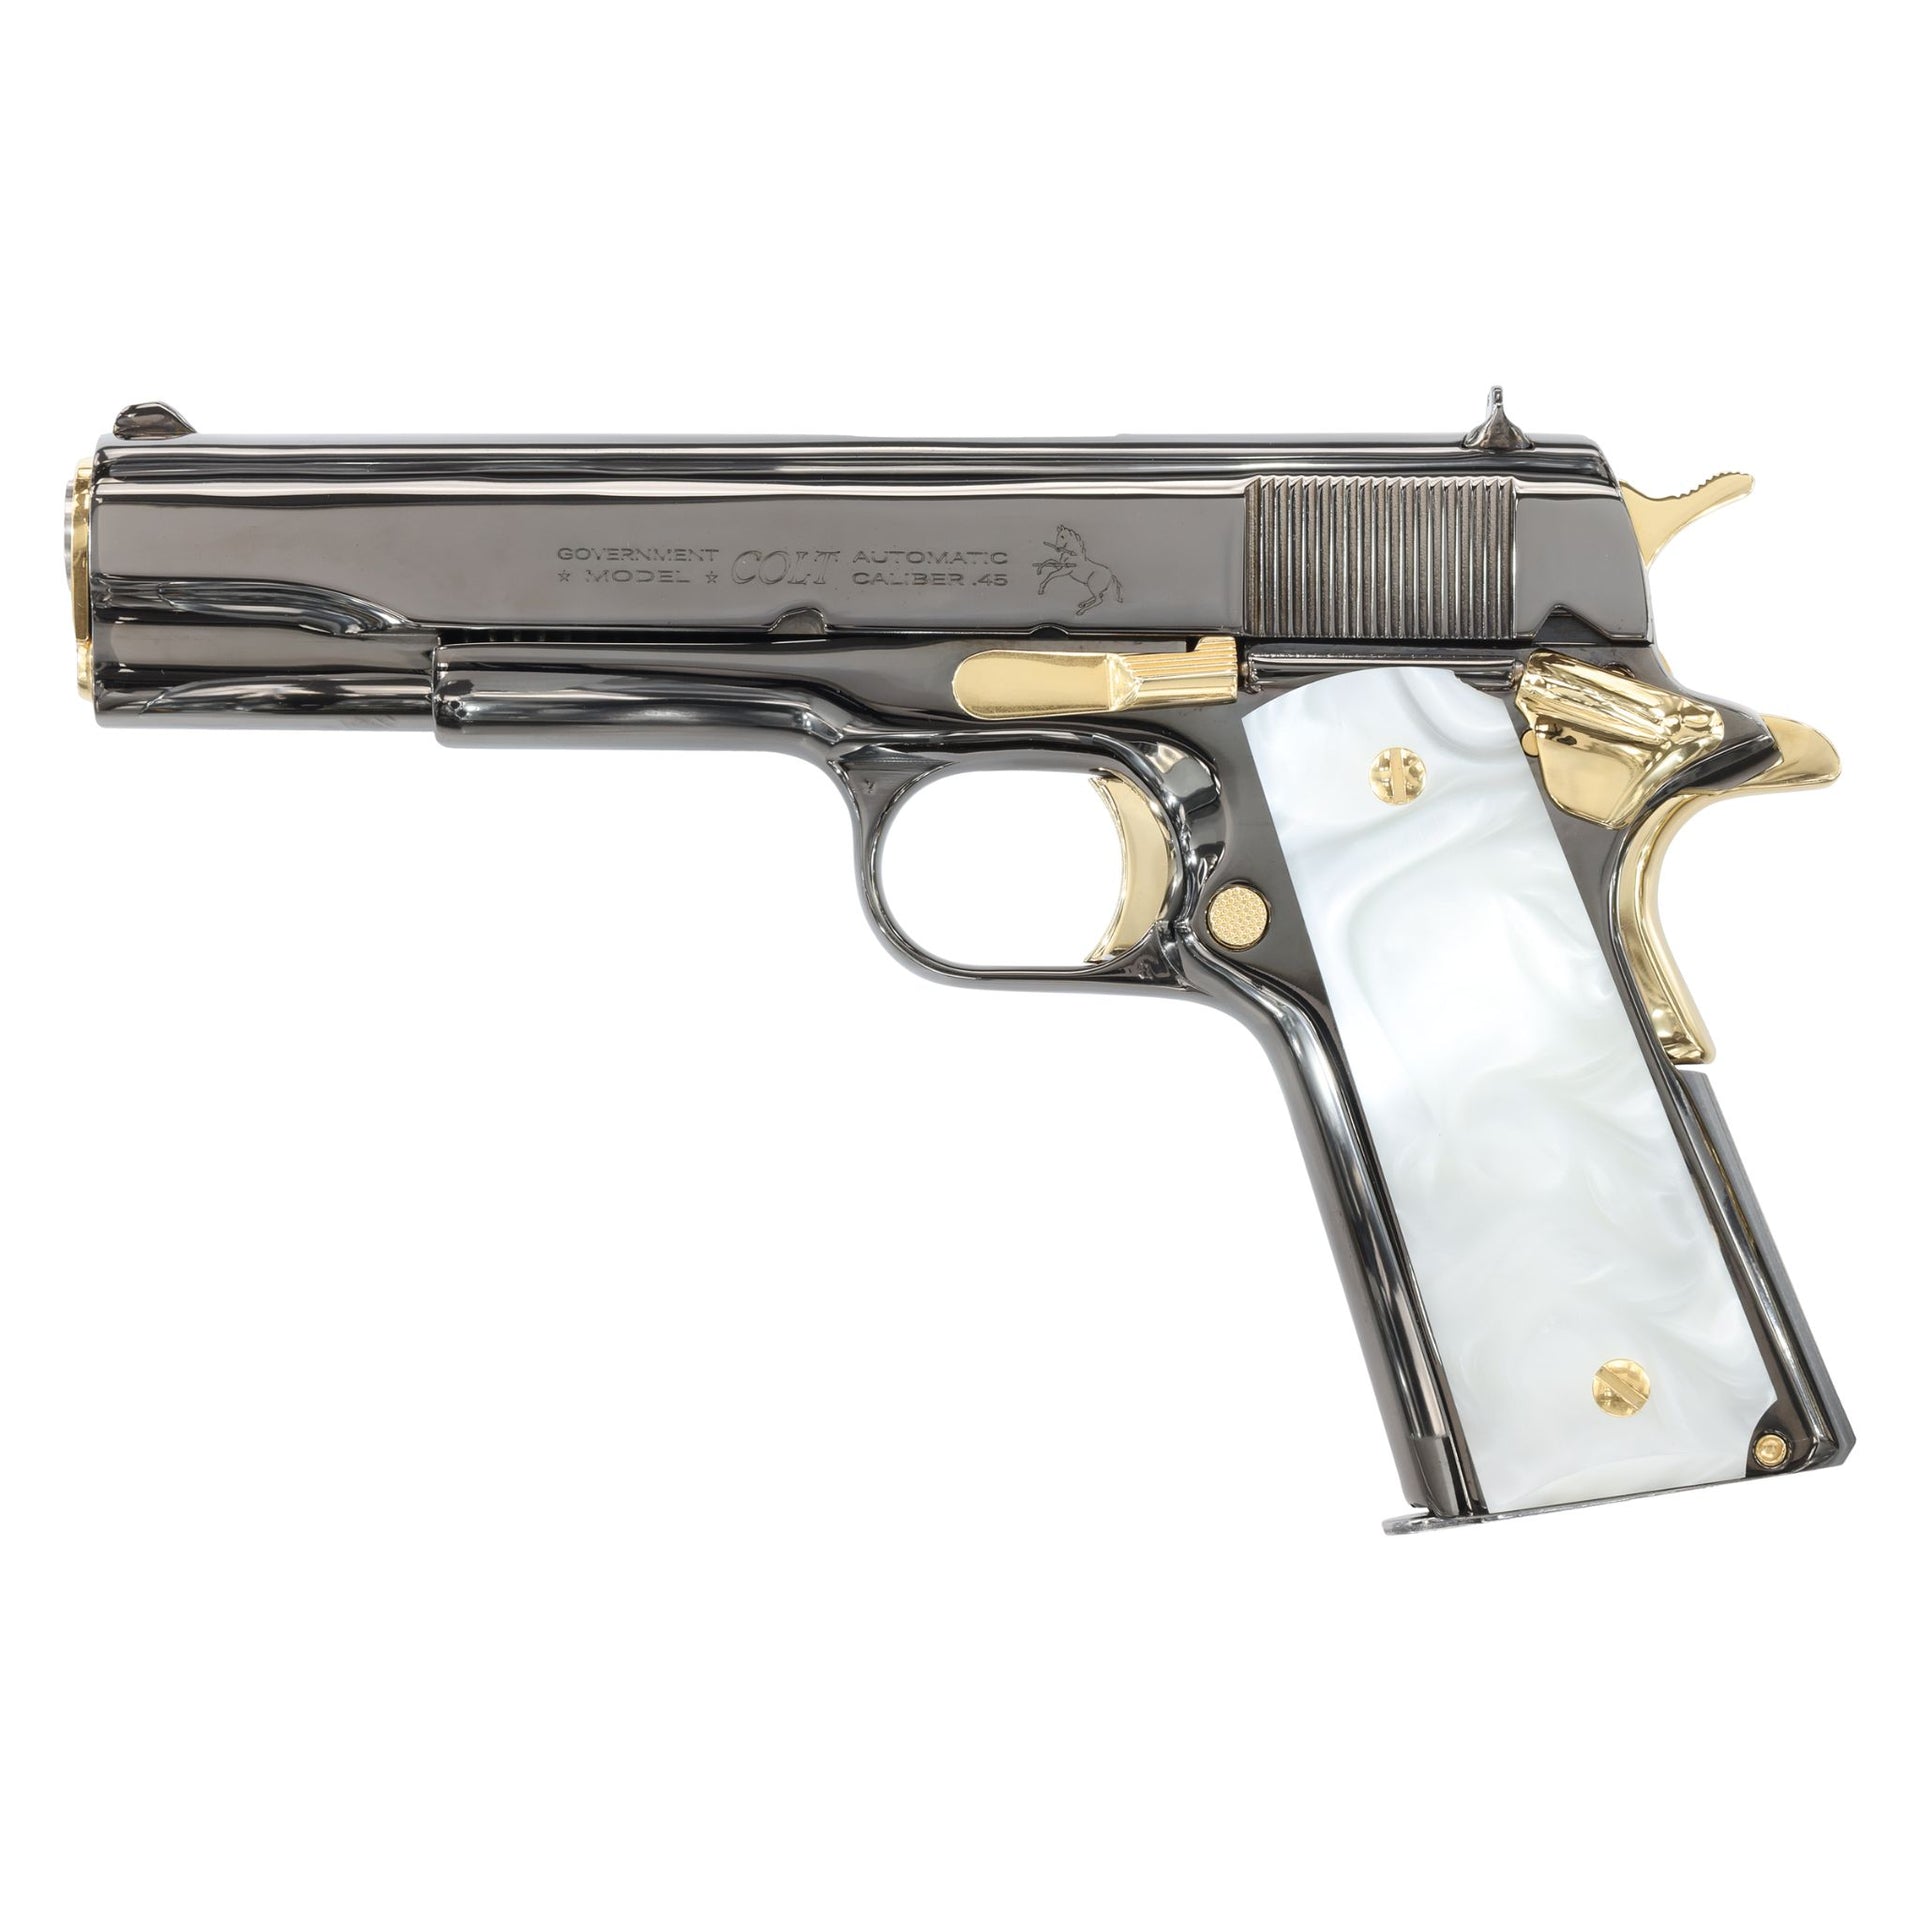 COLT 1911 Government, 45ACP, Mirror Finish Black Chrome with 24K Gold Plated Accents, White Pearlized-Polymer Grips